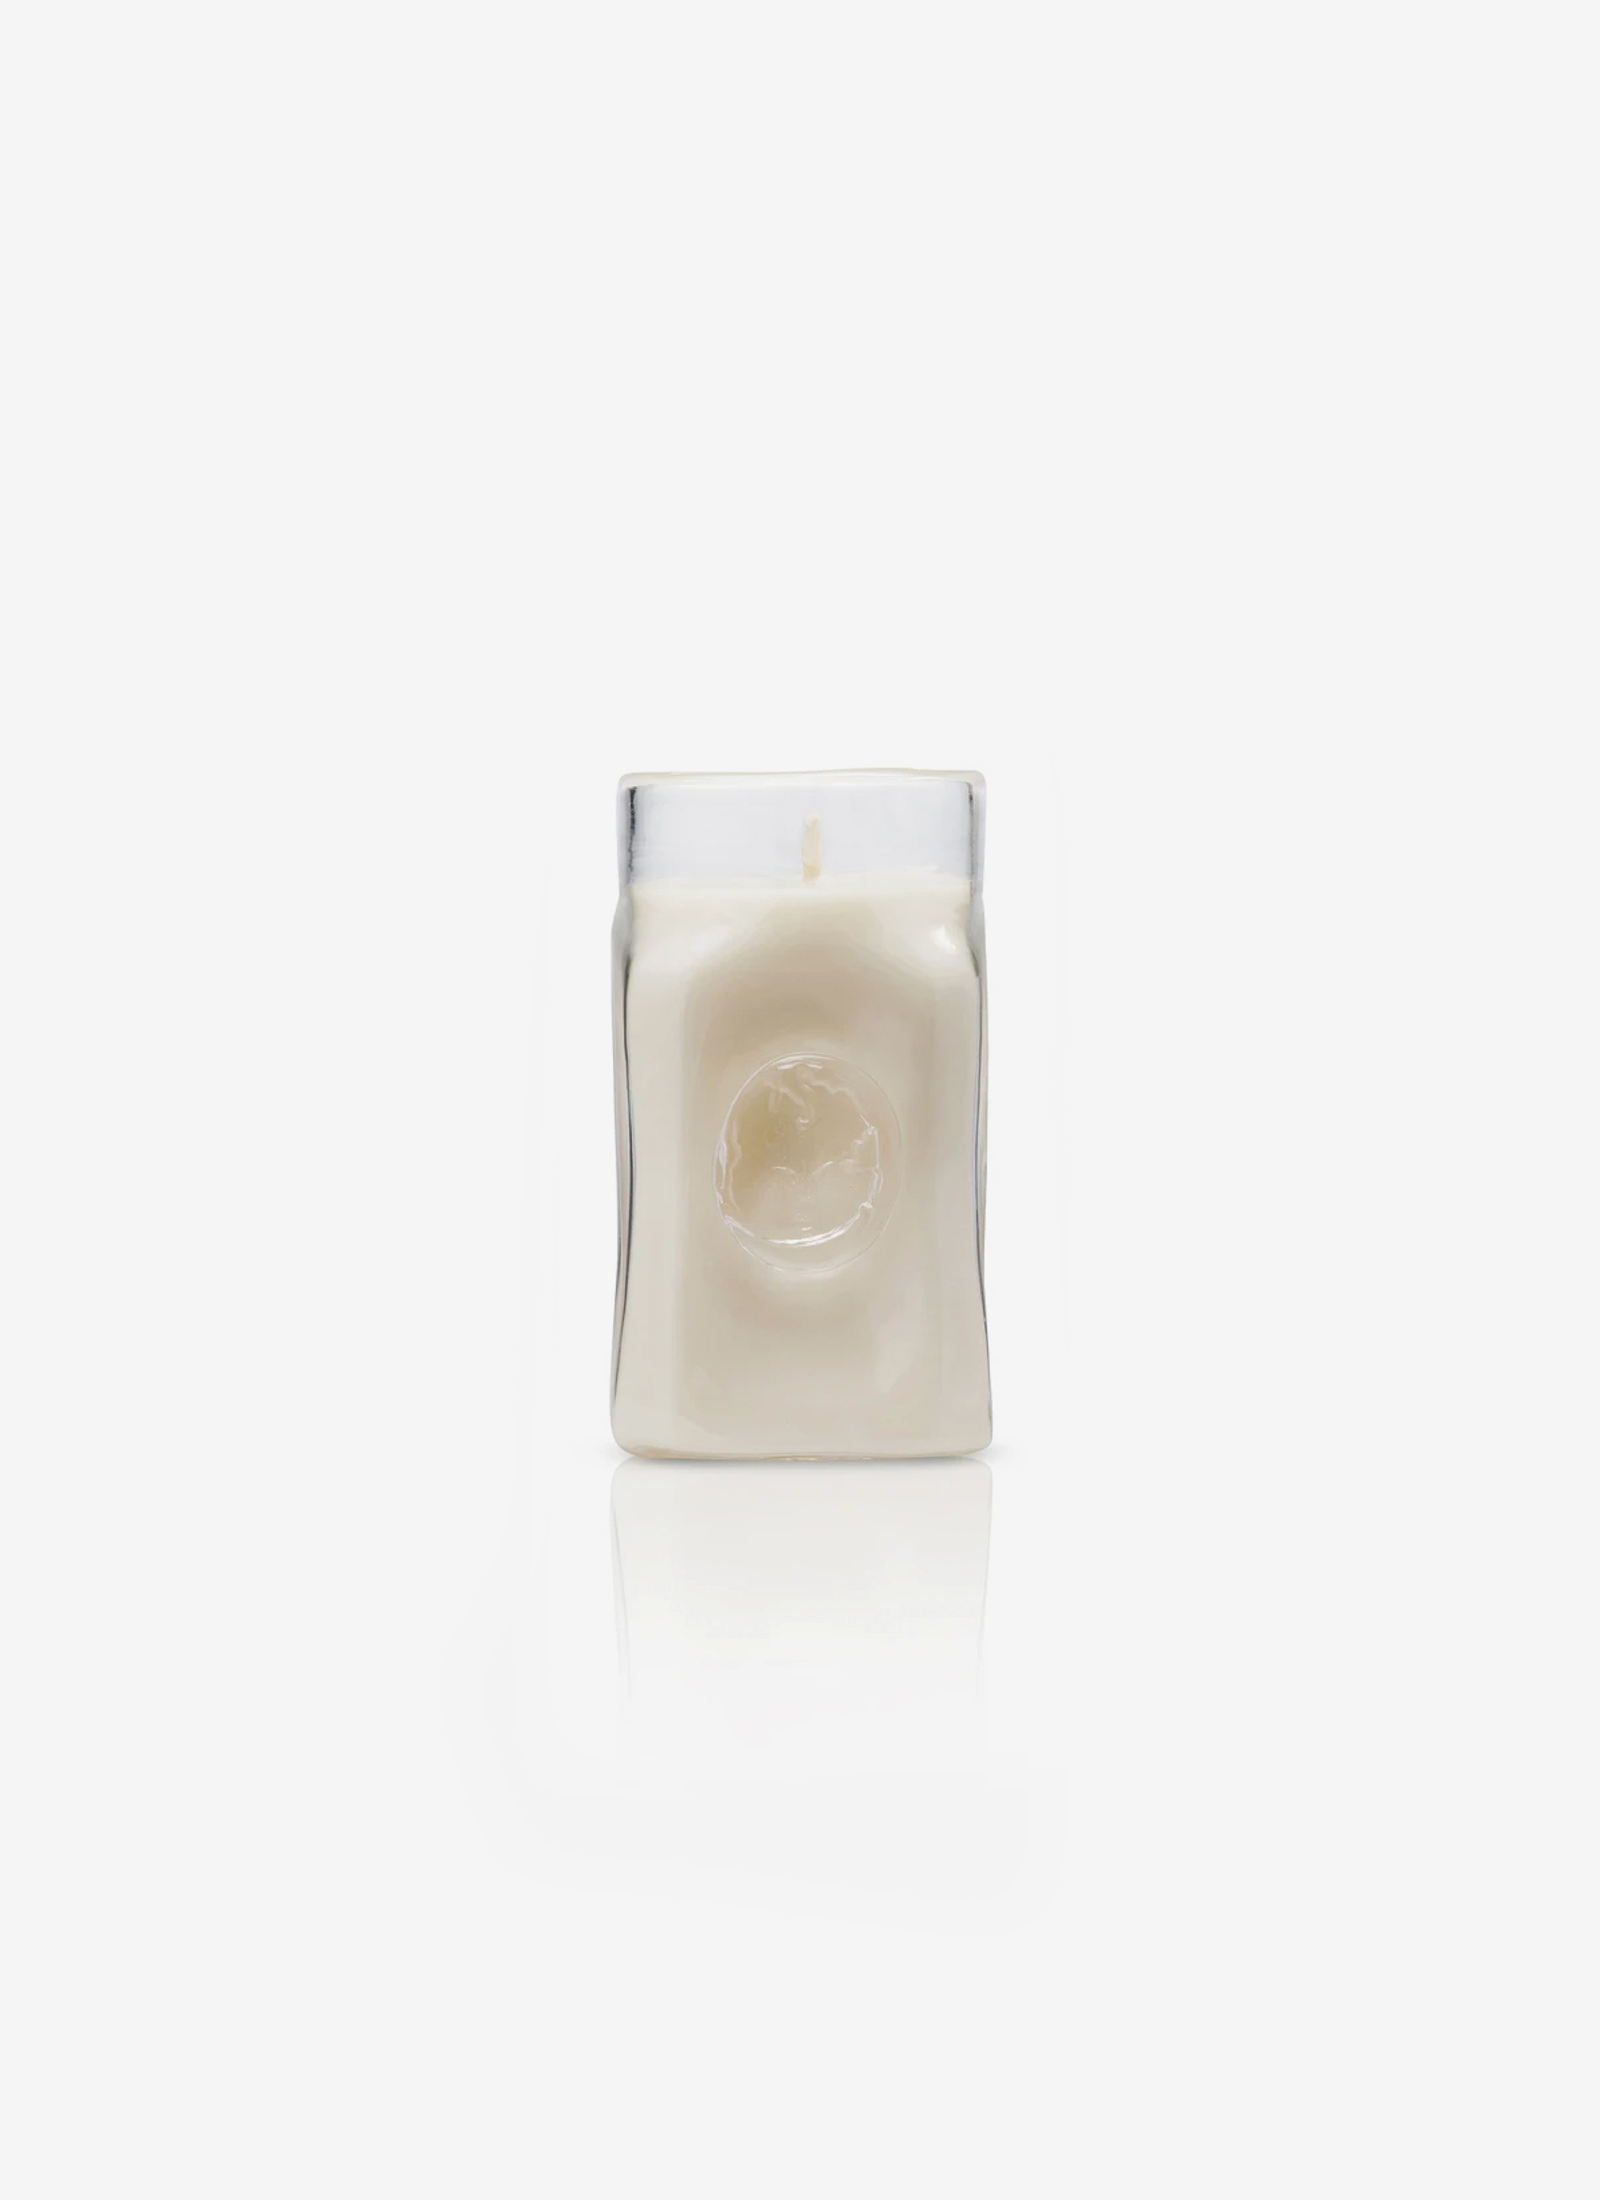 Diaphanous Candle